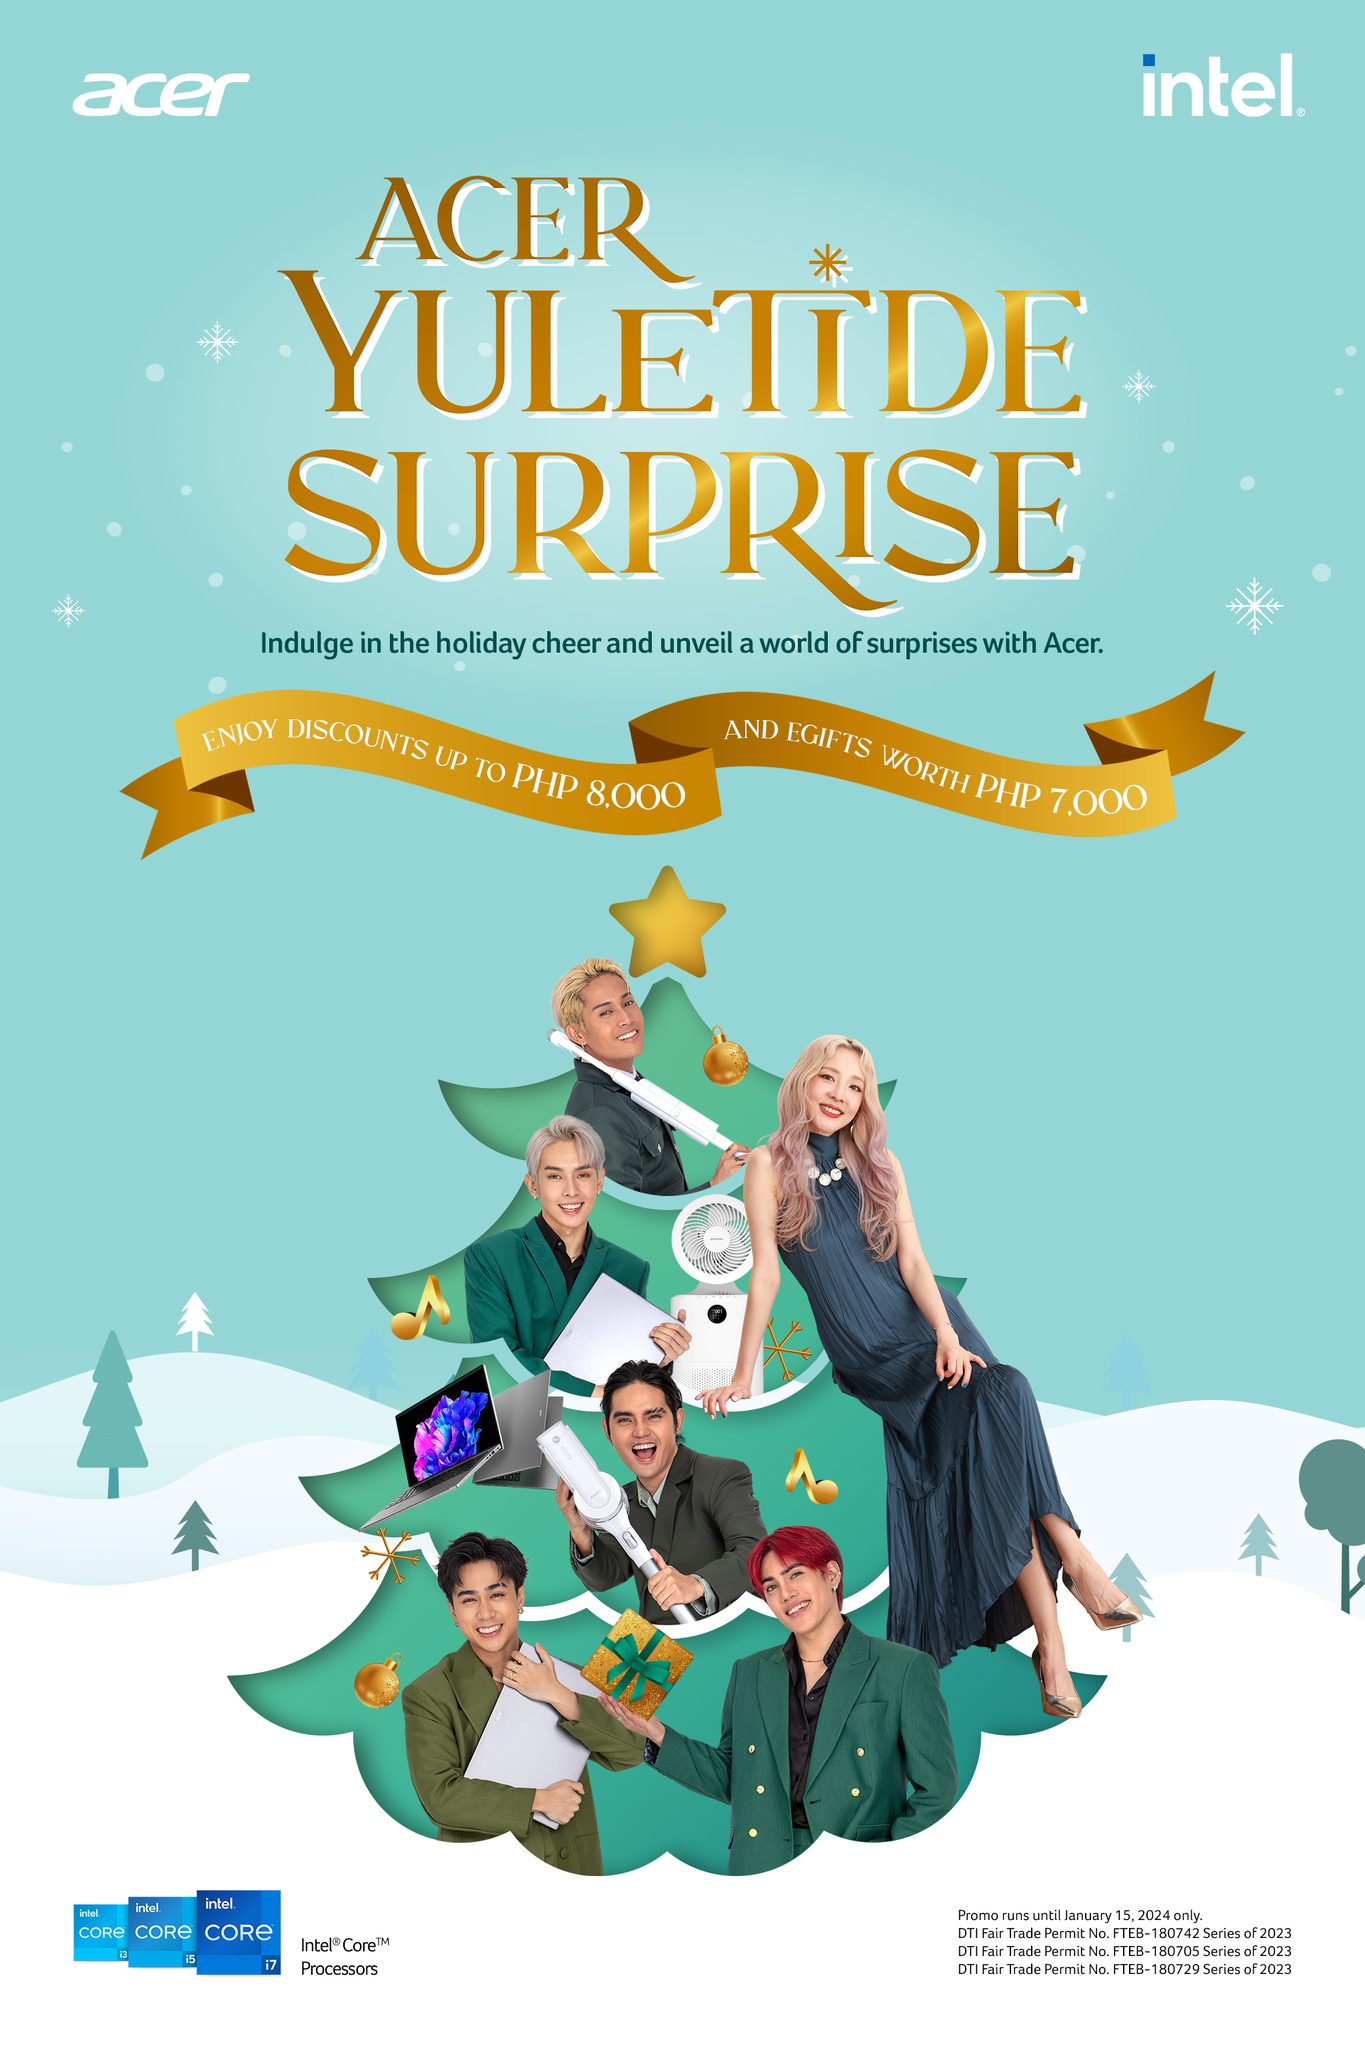 Celebrate the season with tons of discounts and gifts from Acer’s Yuletide Surprise Promo